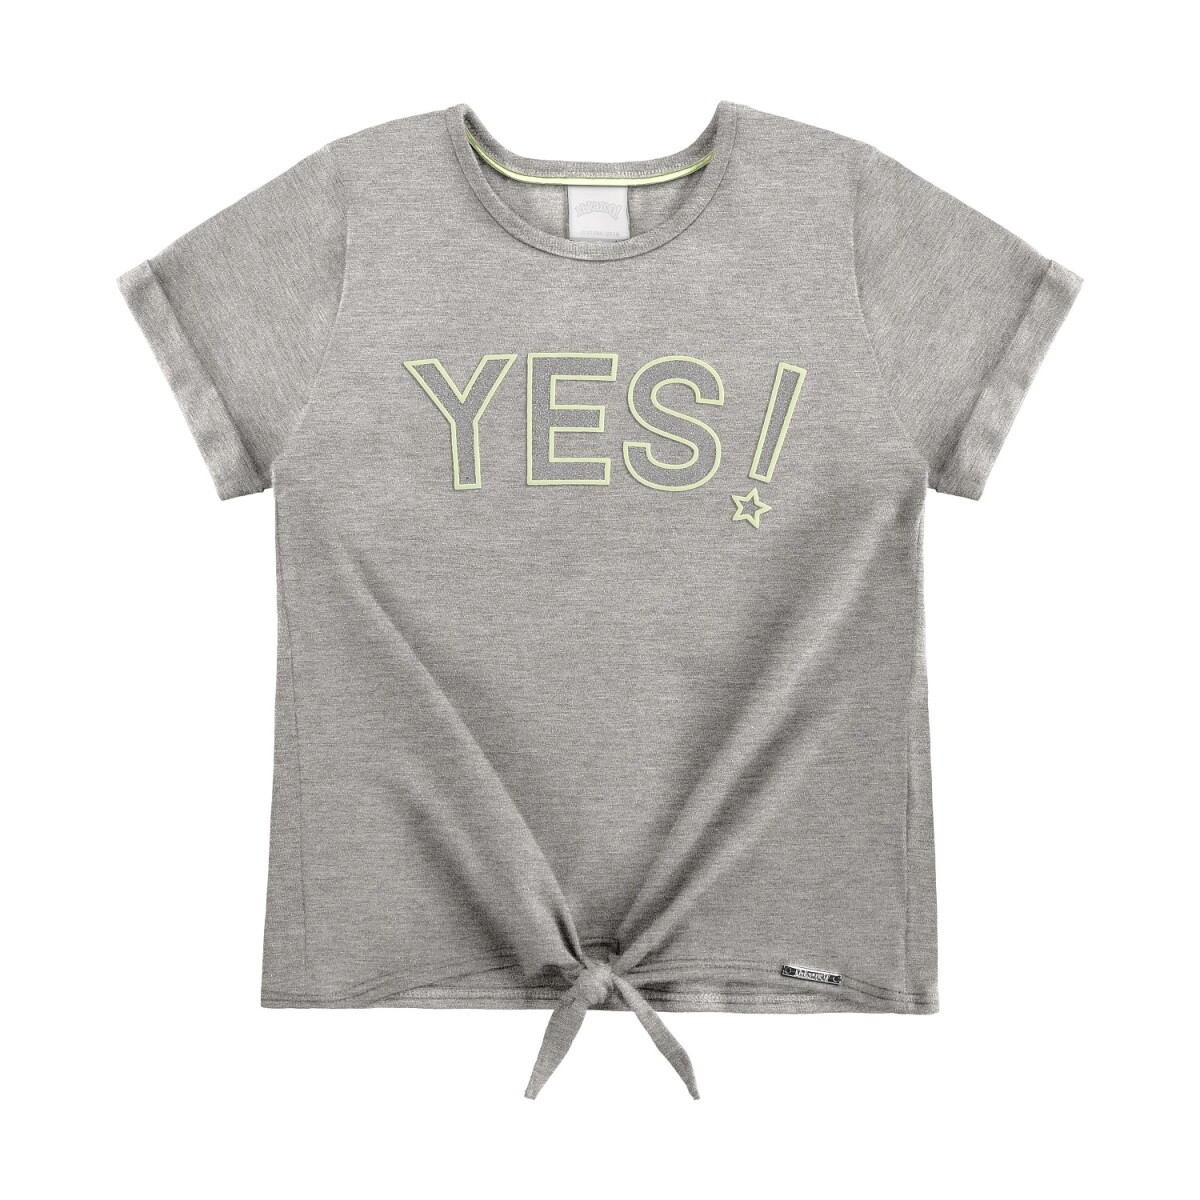 REMERA YES! - GRIS 